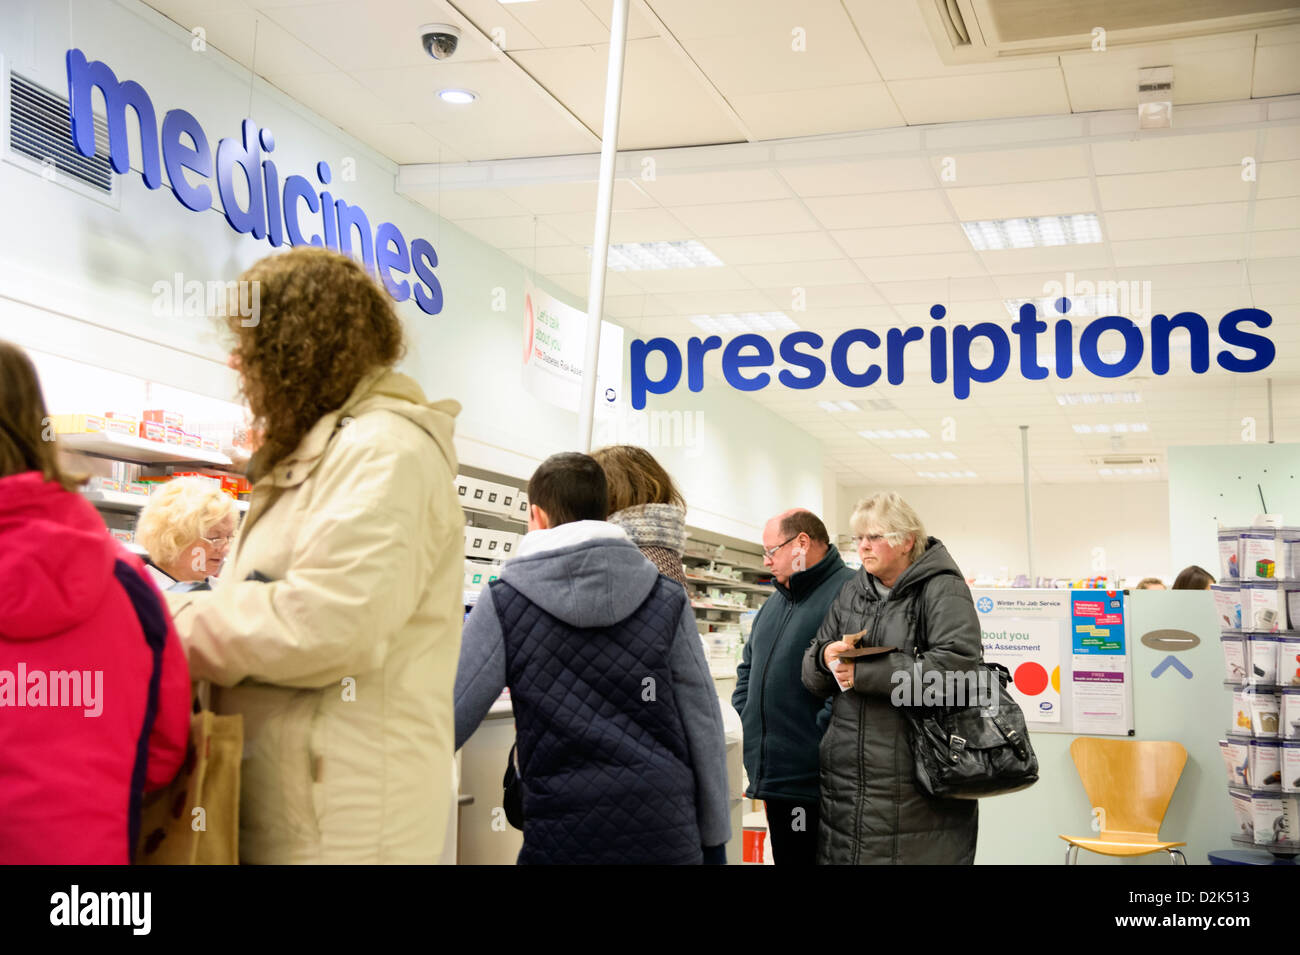 Prescriptions counter inside a Boots shop in Cwmbran, South Wales, UK. People queuing for over the counter medicines. Stock Photo